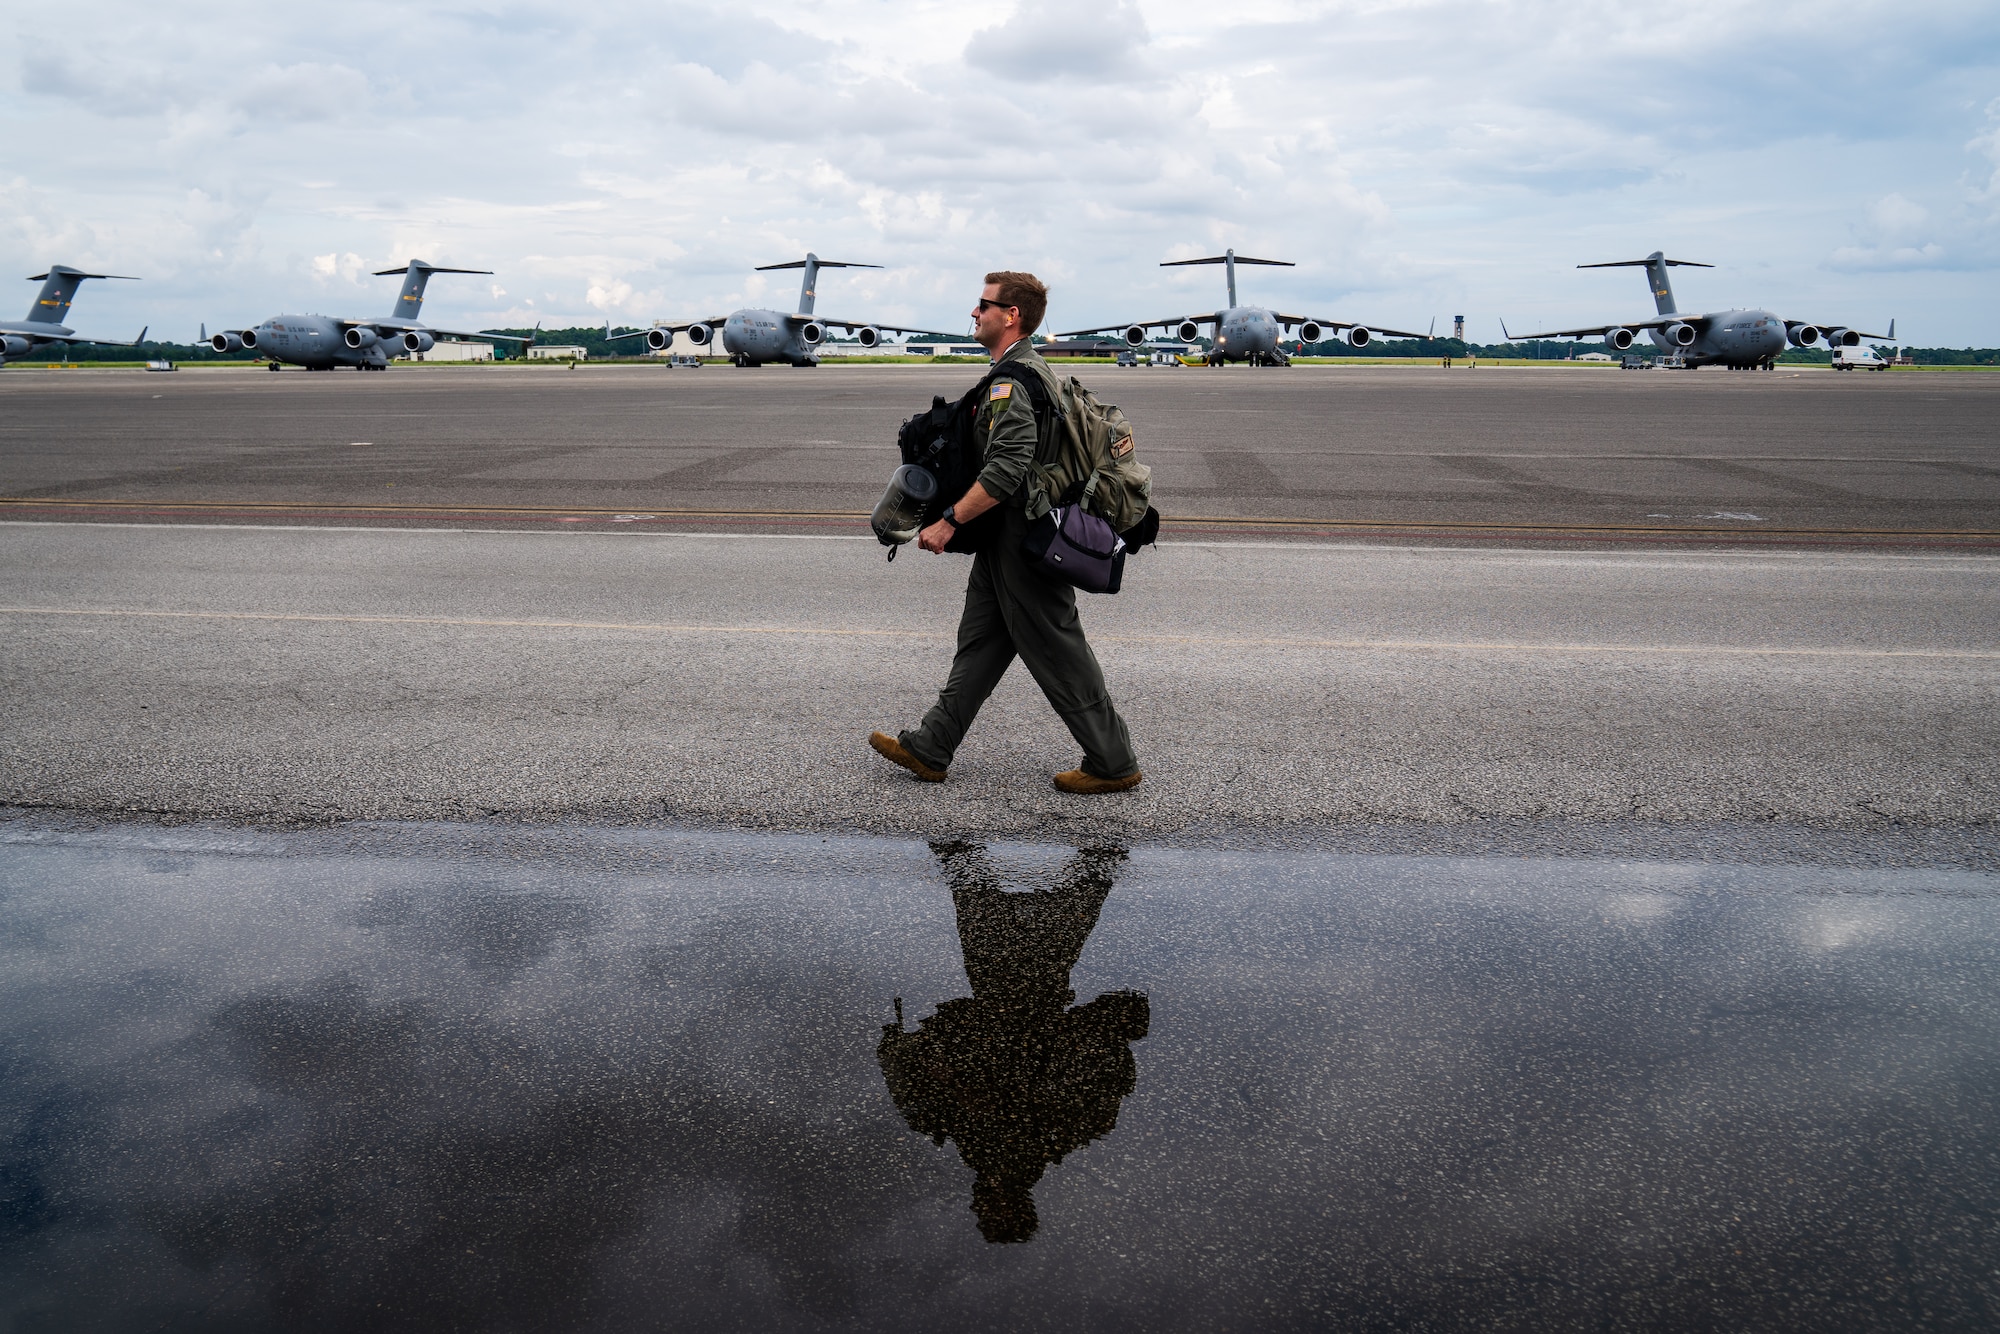 U.S. Air Force Capt. Jaymes Trimbe, 50th Air Refueling Squadron pilot, walks on the flight line during the 6th Air Refueling Wing’s Agile Combat Employment capstone exercise at Joint Base Charleston, South Carolina, Aug. 23, 2022.